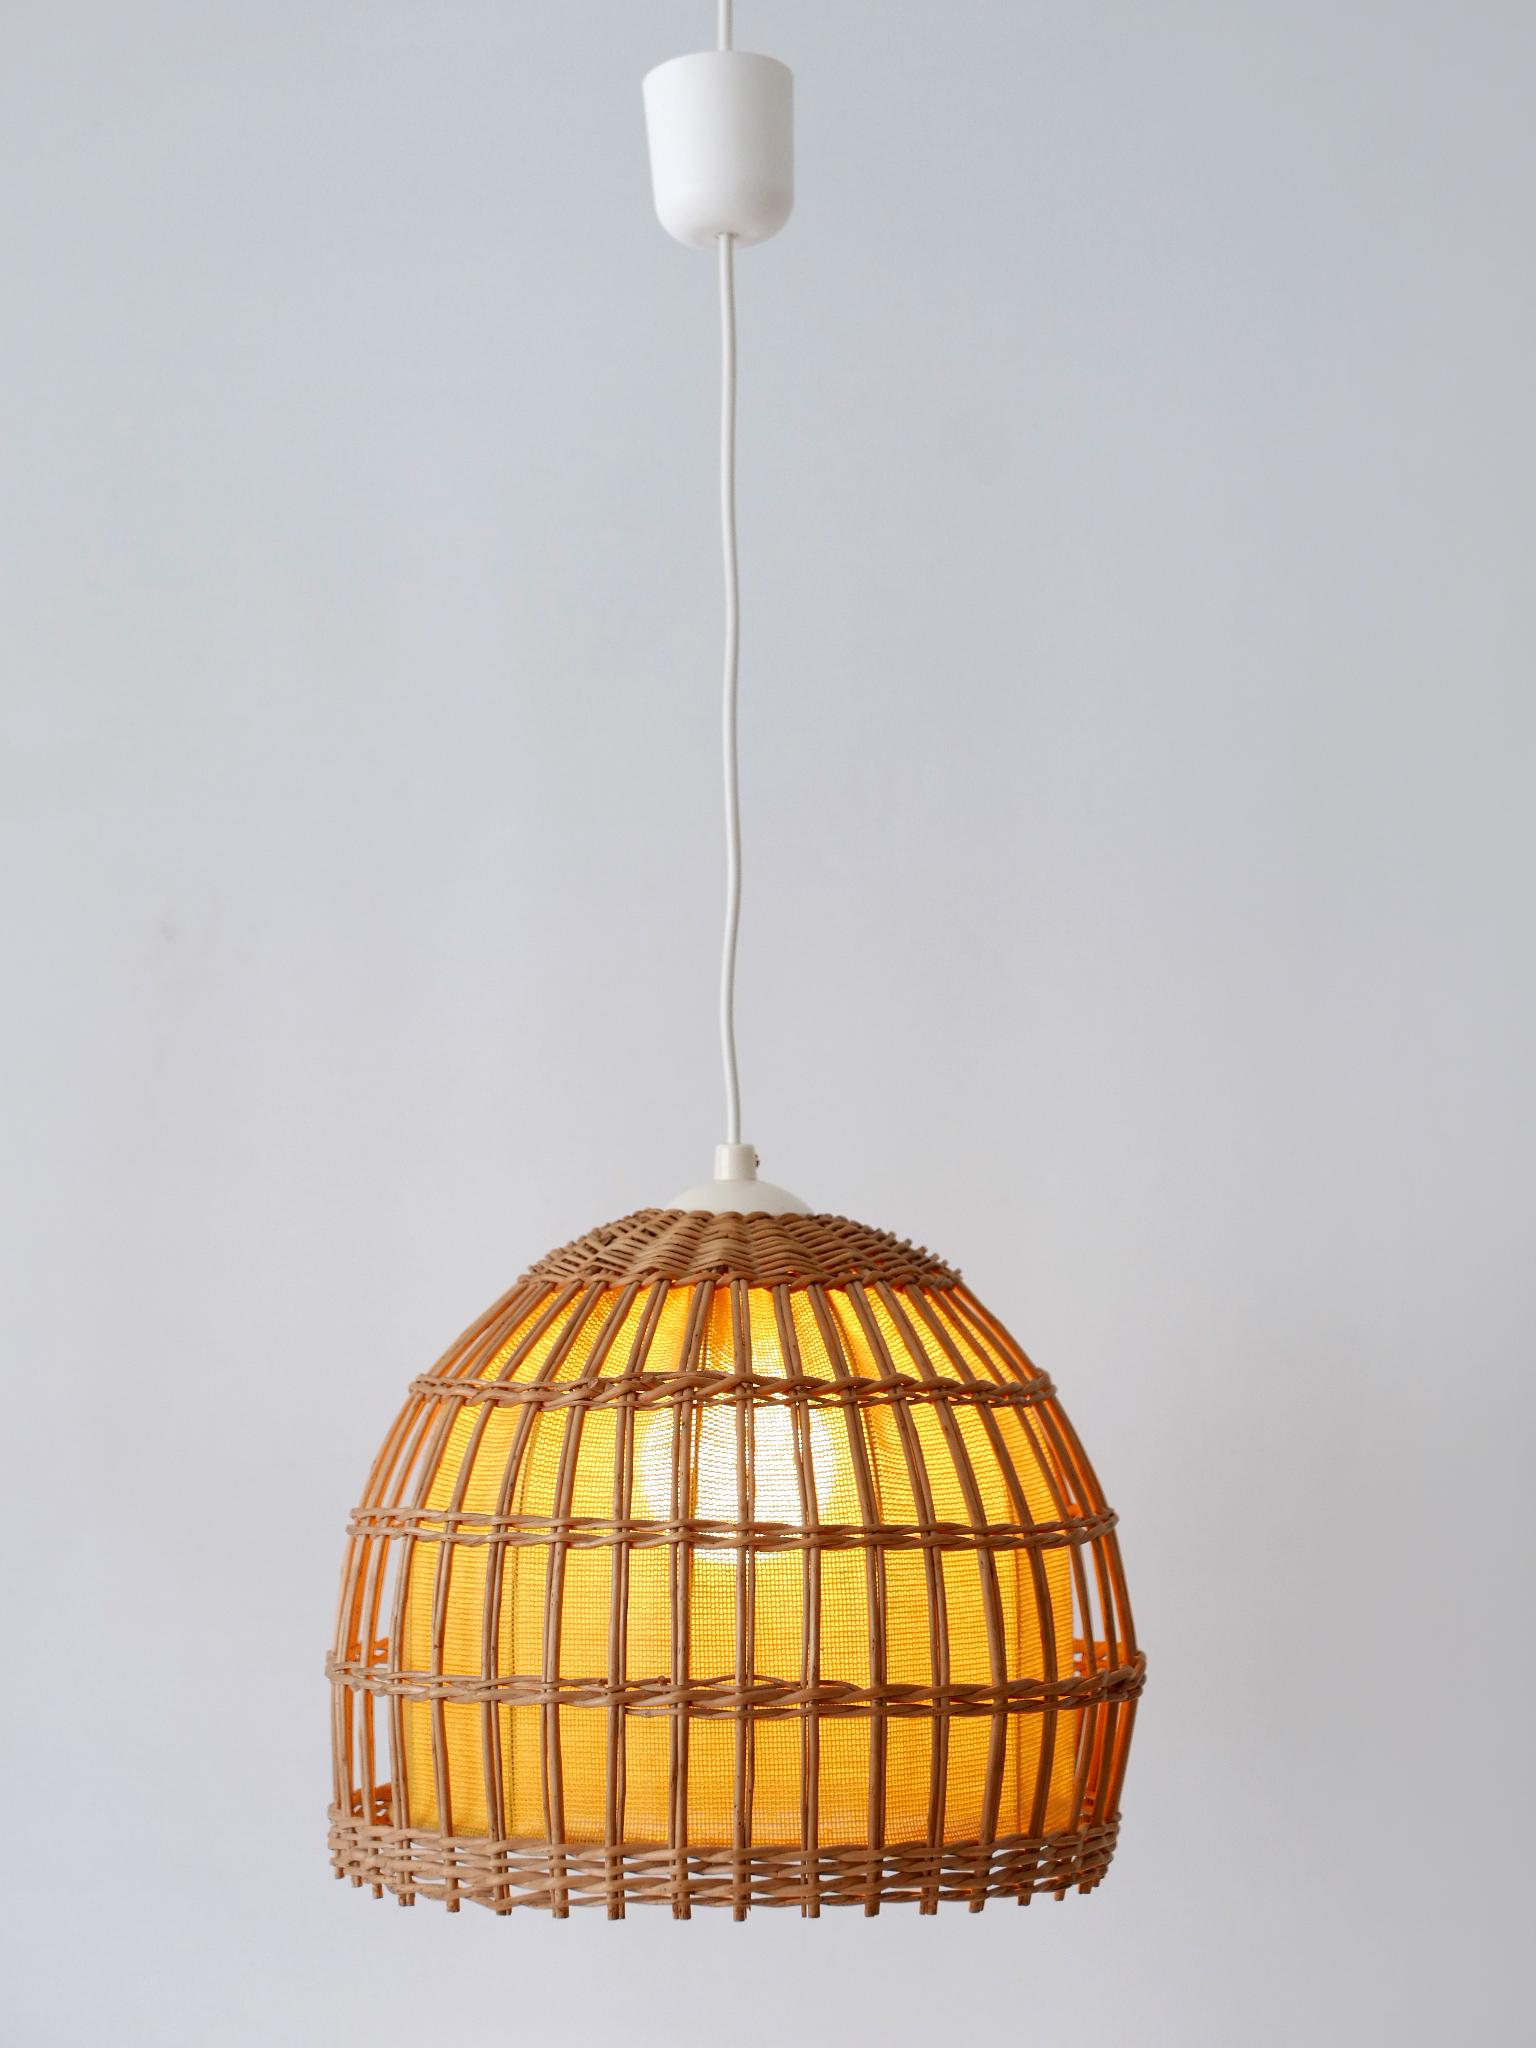 Lovely & highly decorative Mid-Century Modern pendant lamp or hanging light. Designed & manufactured in Germany, 1960s.

Executed in rattan and fabric, the pendant lamp comes with 1 x E27 / E26 Edison screw fit bulb socket, is rewired and in working